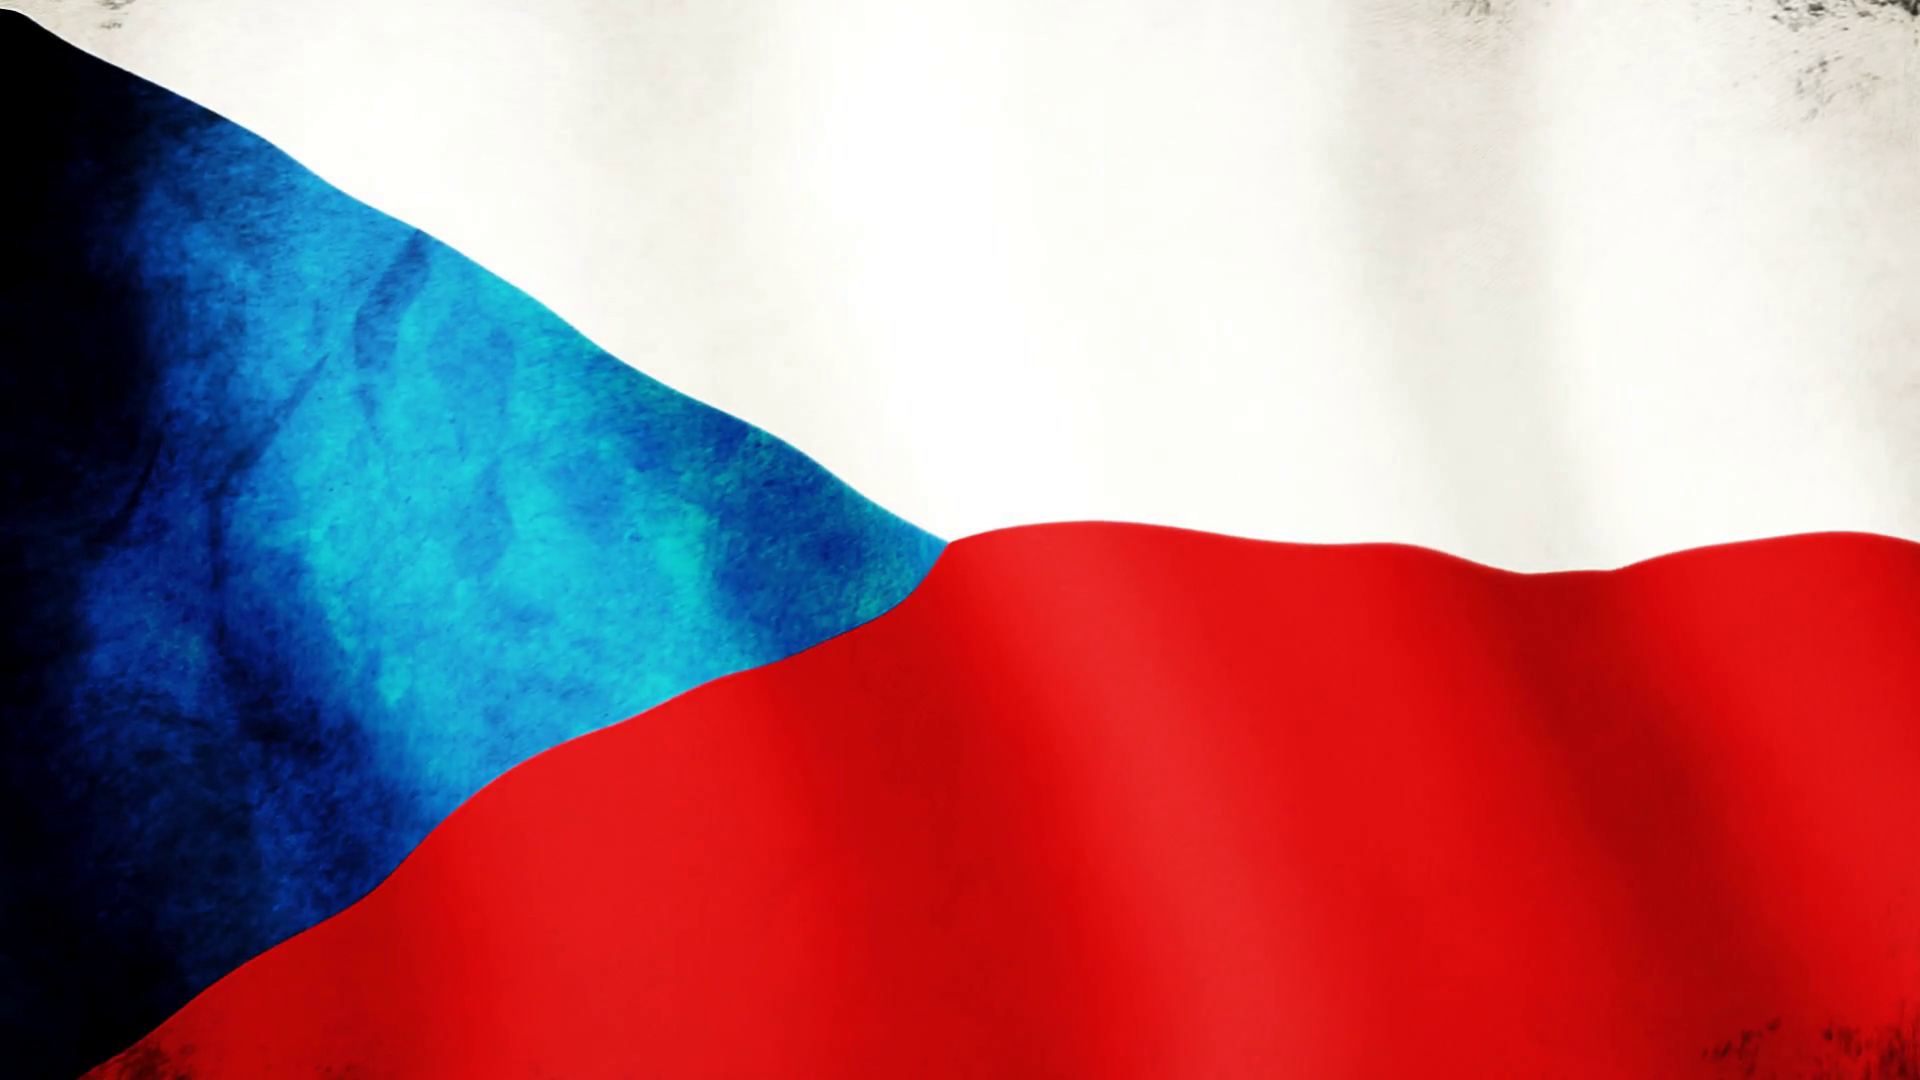 Free download The Czech Republic Flag Full HD 1920x1080 Shabby Motion [1920x1080] for your Desktop, Mobile & Tablet. Explore Czech Republic Flag Wallpaper. Czech Republic Flag Wallpaper, Dominican Republic